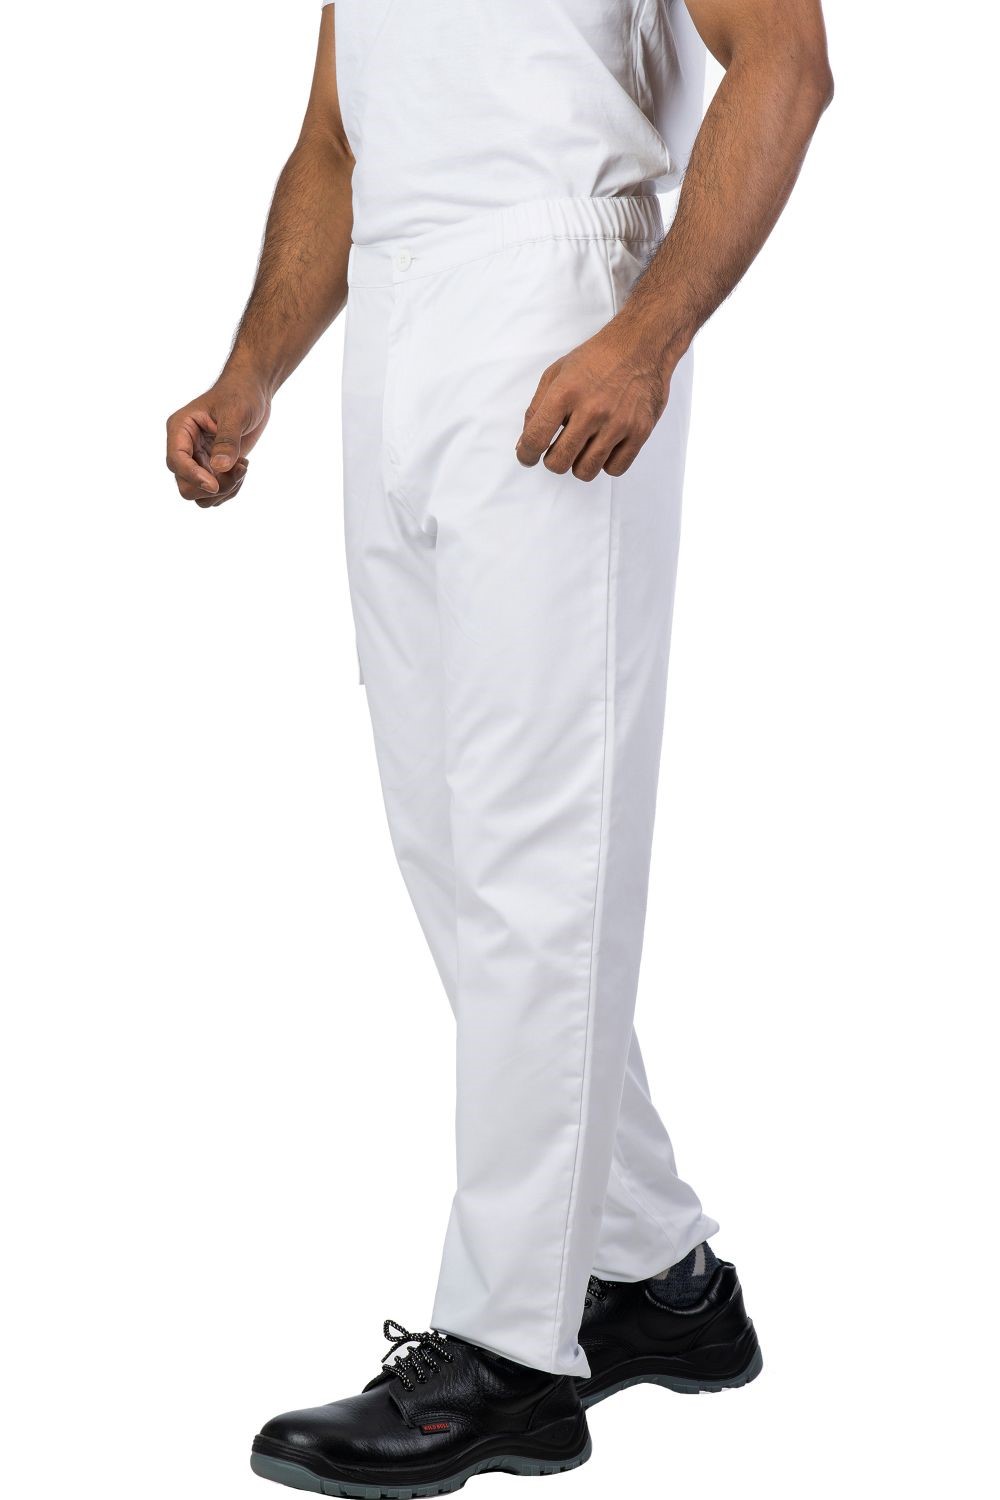 white cotton blend chef trouser for hospitality use